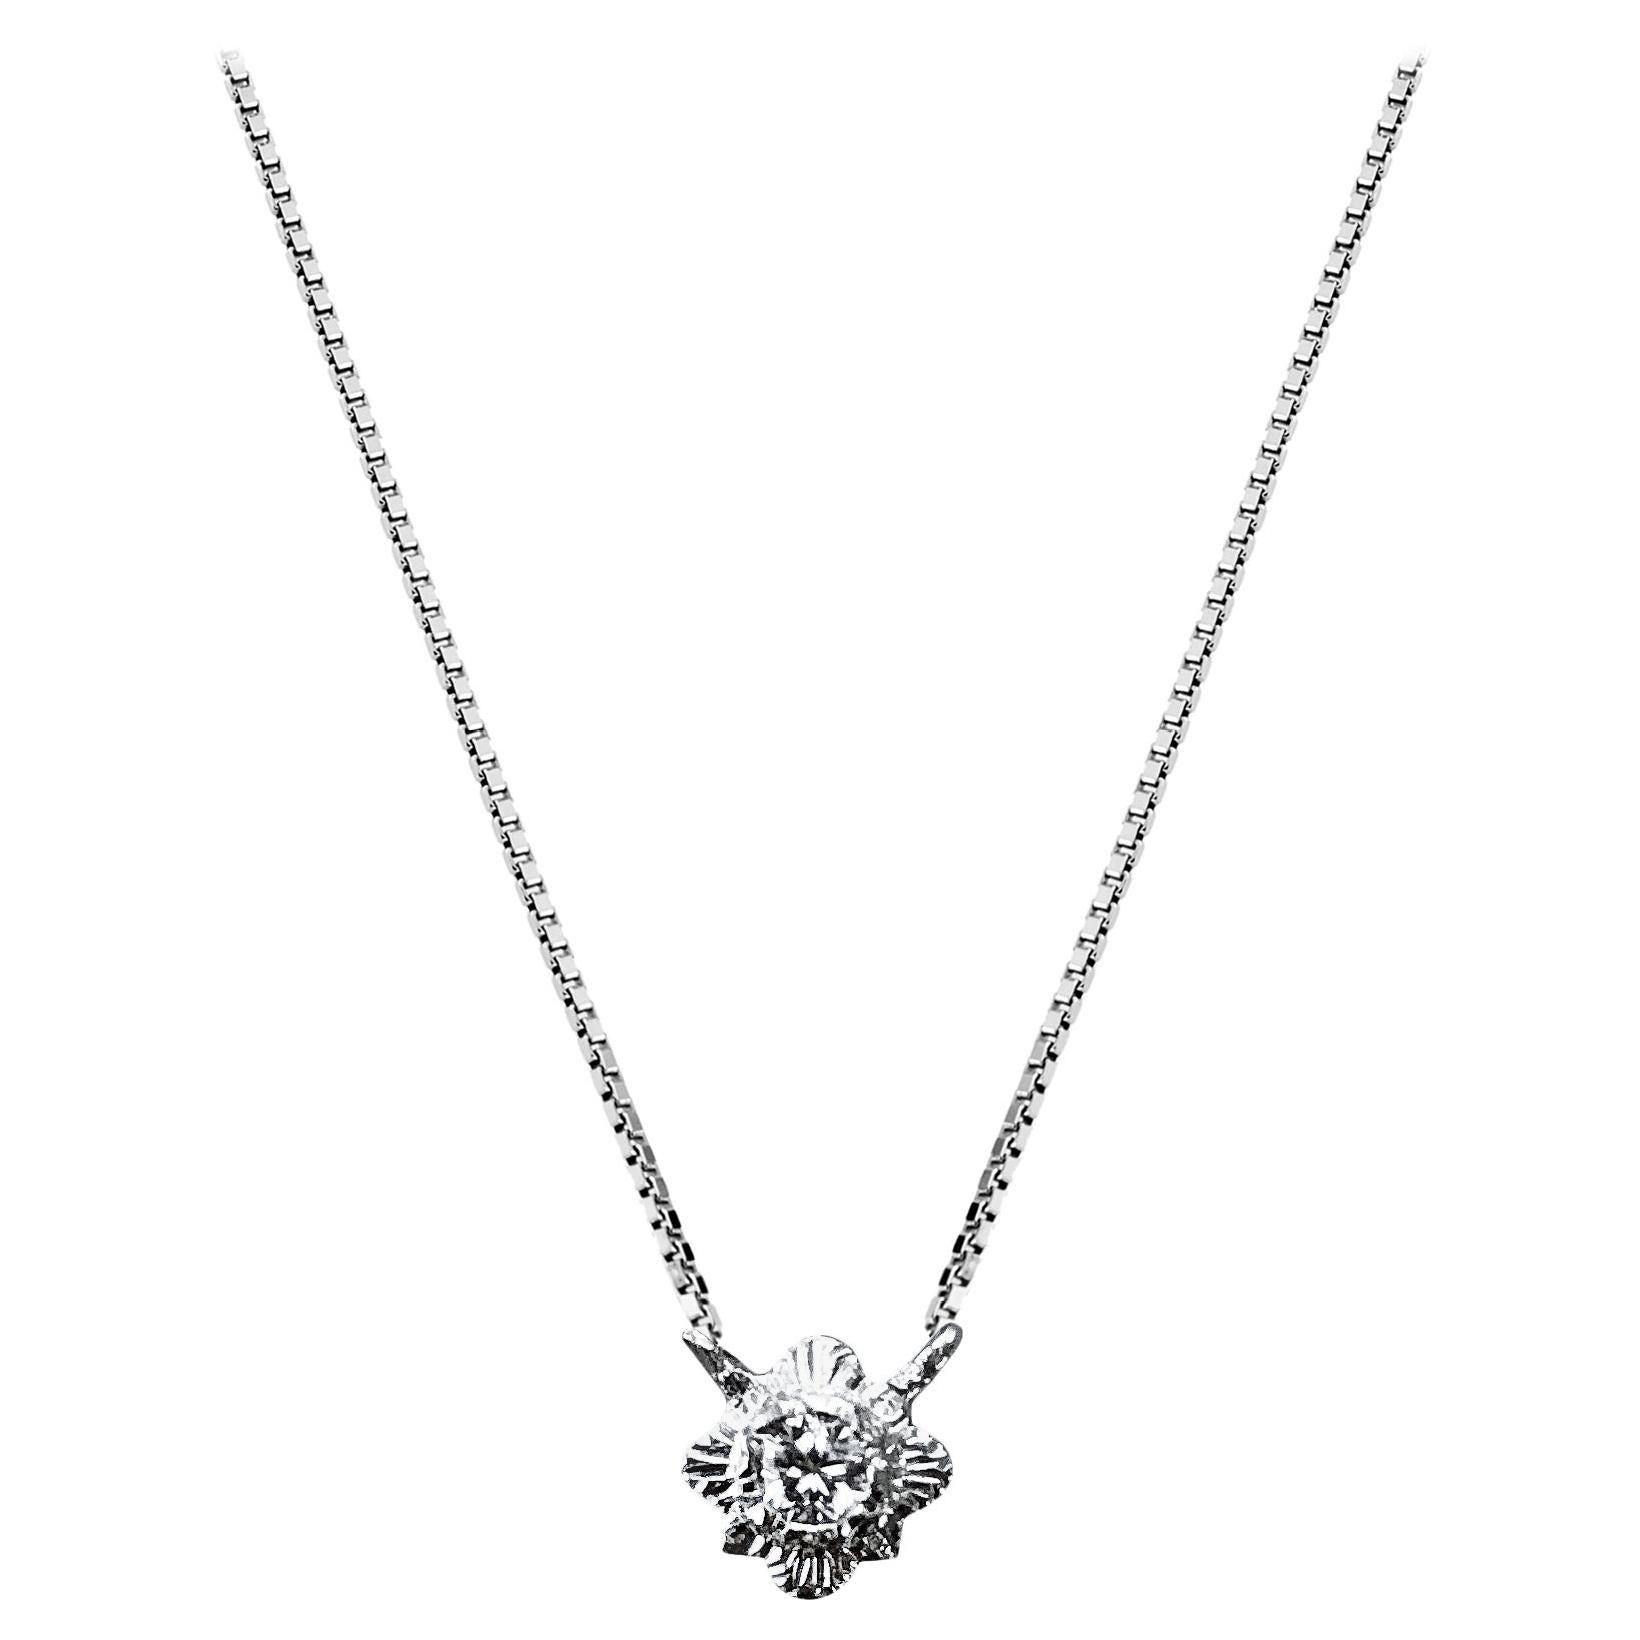 Diamond Floral Designed Pendant set in 18Kt White Gold Chained Necklace 